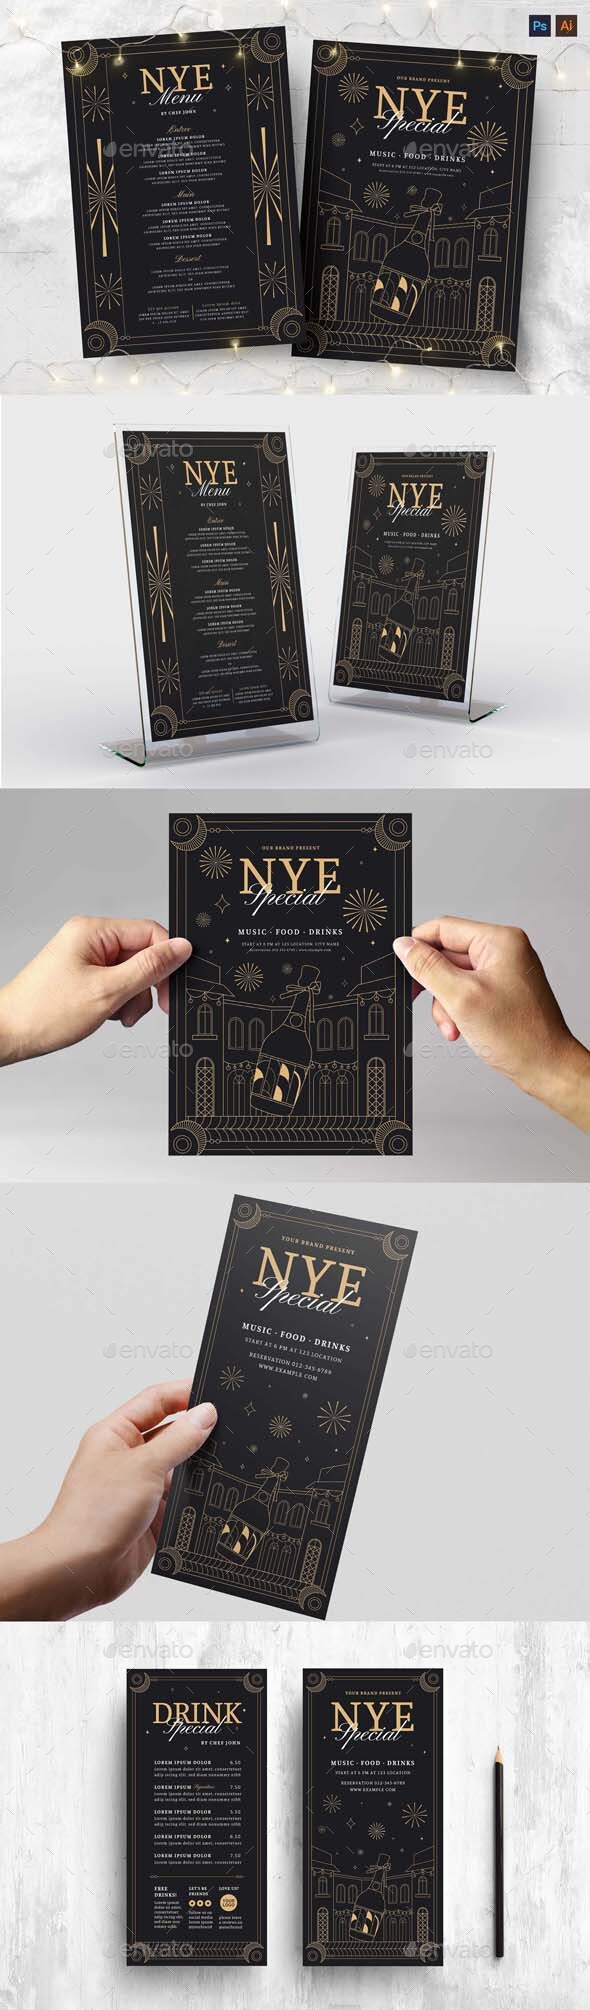 New Year's Eve Flyer & Menu Template